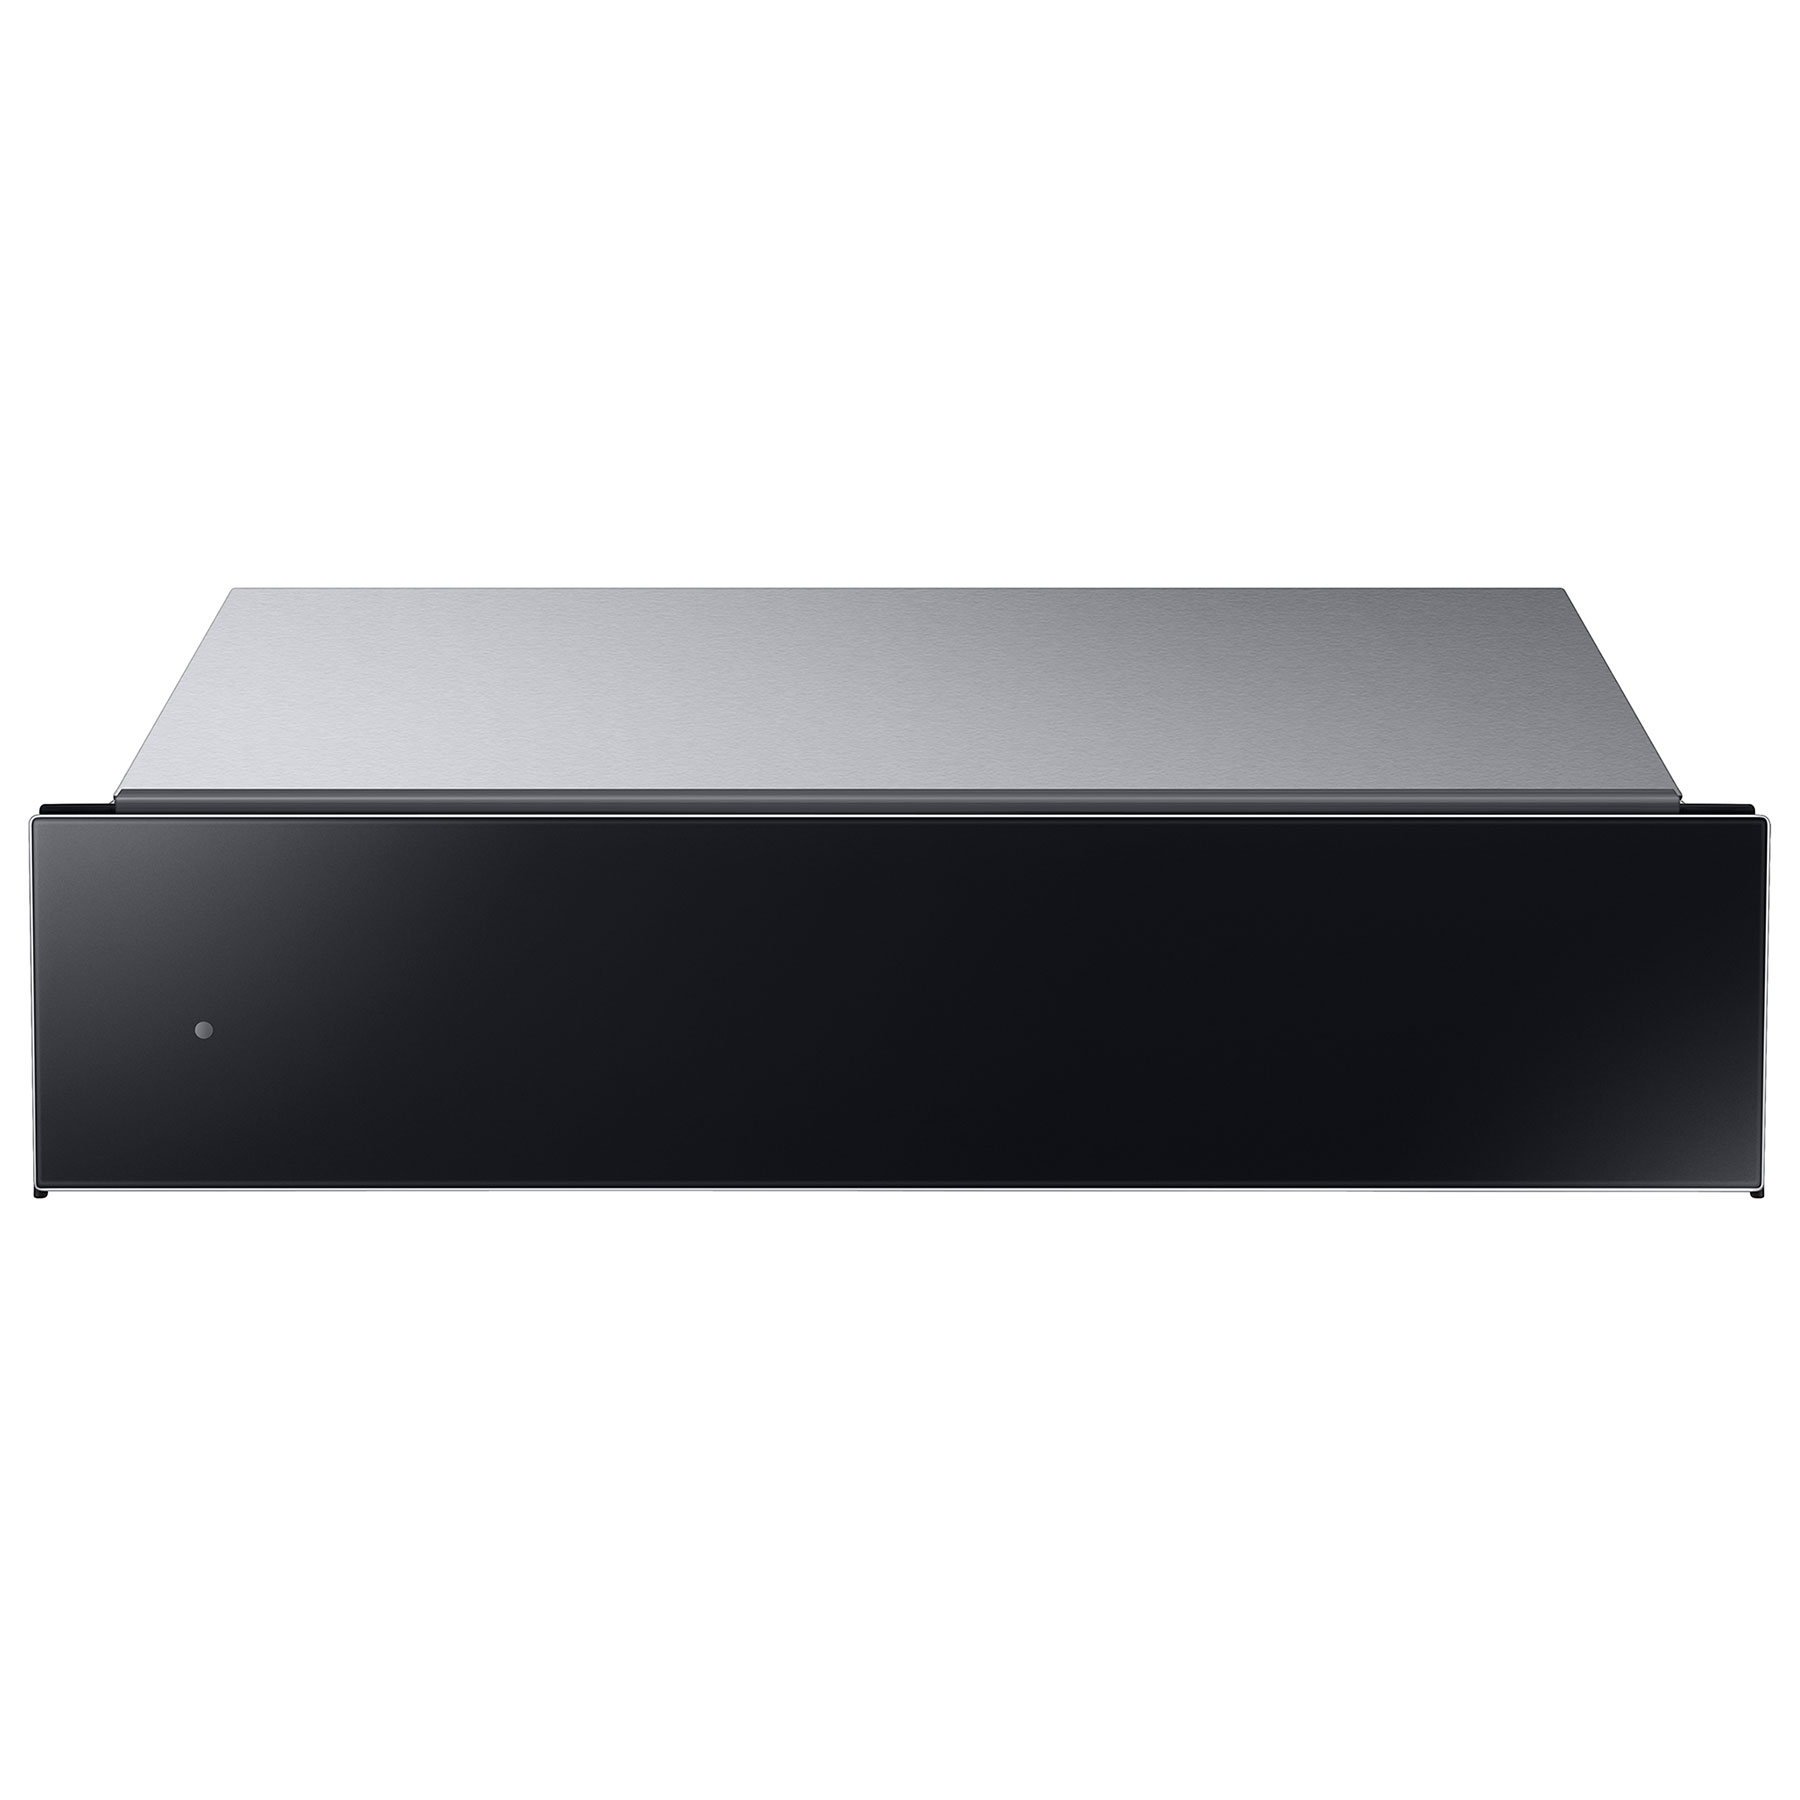 Image of Samsung NL20T8100WK 15cm Neo Built In Warming Drawer in Black